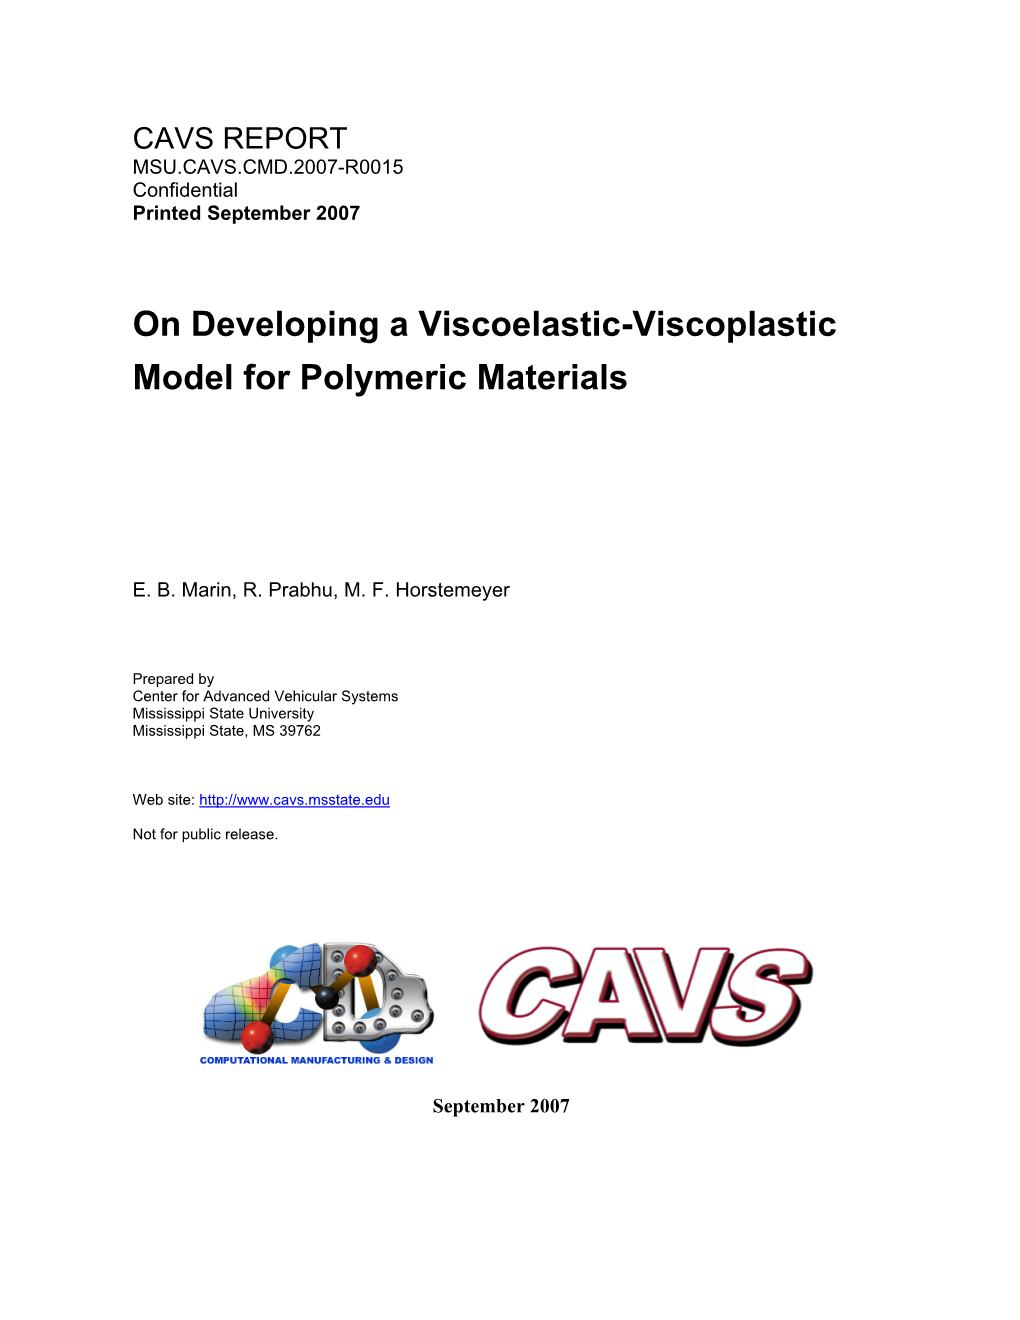 On Developing a Viscoelastic-Viscoplastic Model for Polymeric Materials